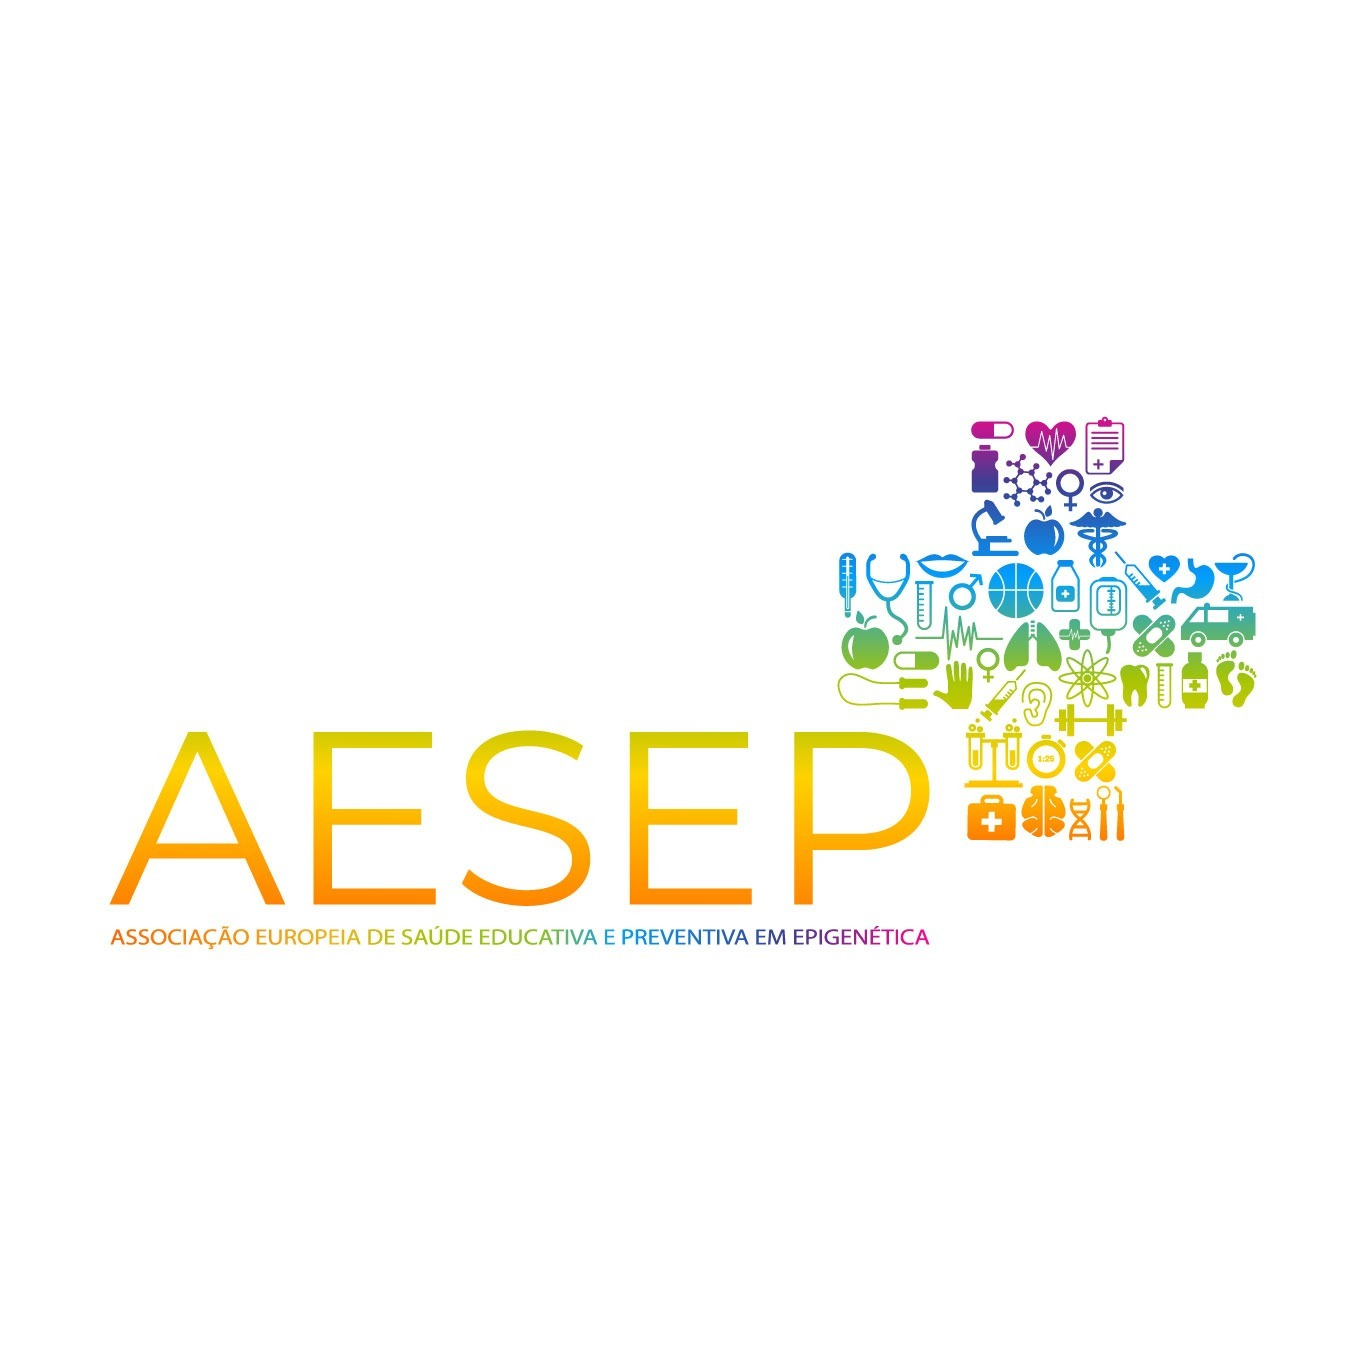 European Association for Educational and Preventive Health in Epigenetics